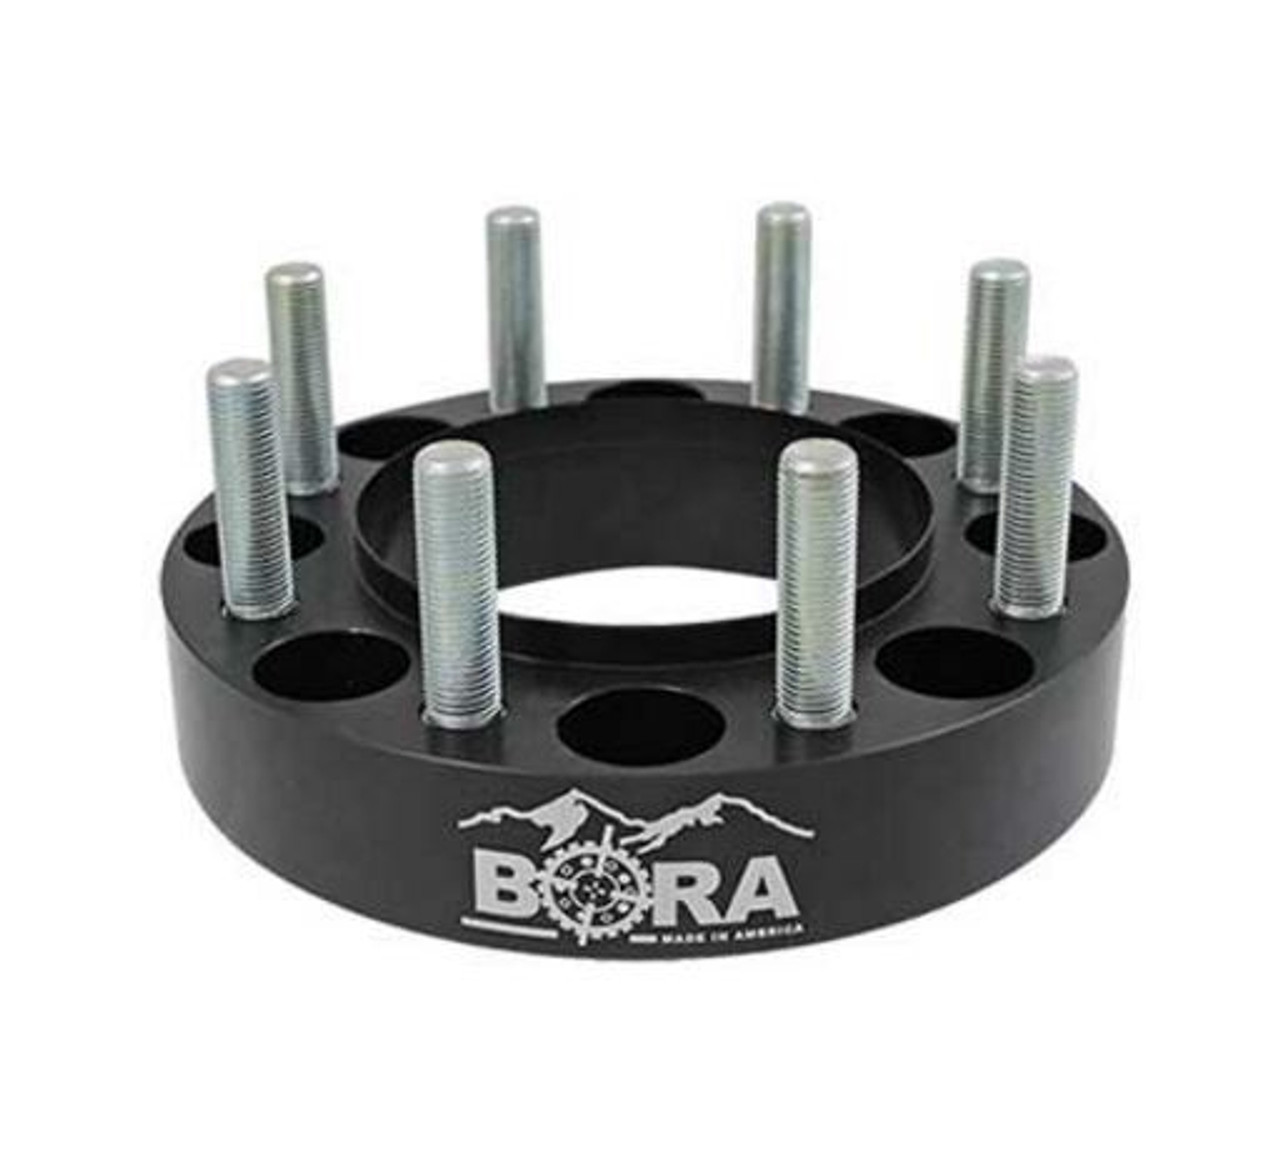 Aluminum Rear Wheel Spacer Pair for International/Case 250A Tractor